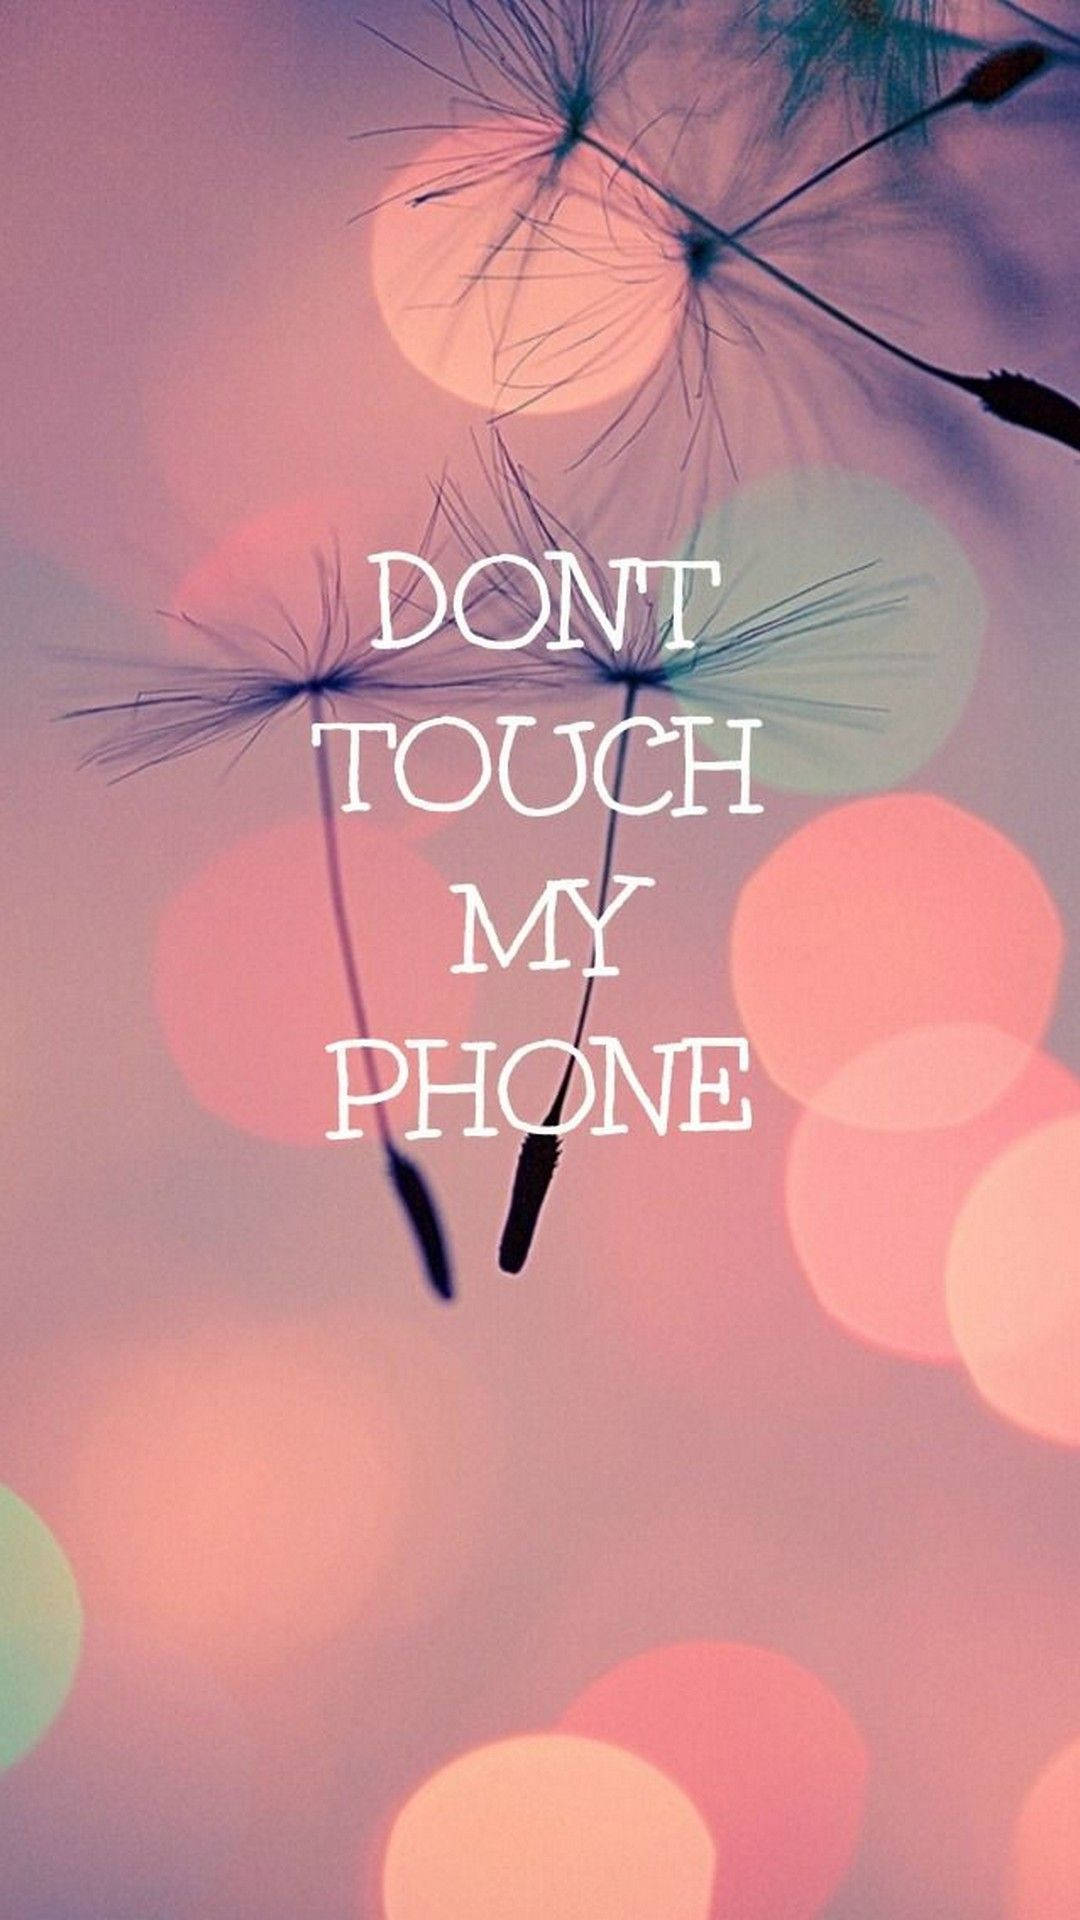 Watch Out! Don't touch my phone! Wallpaper